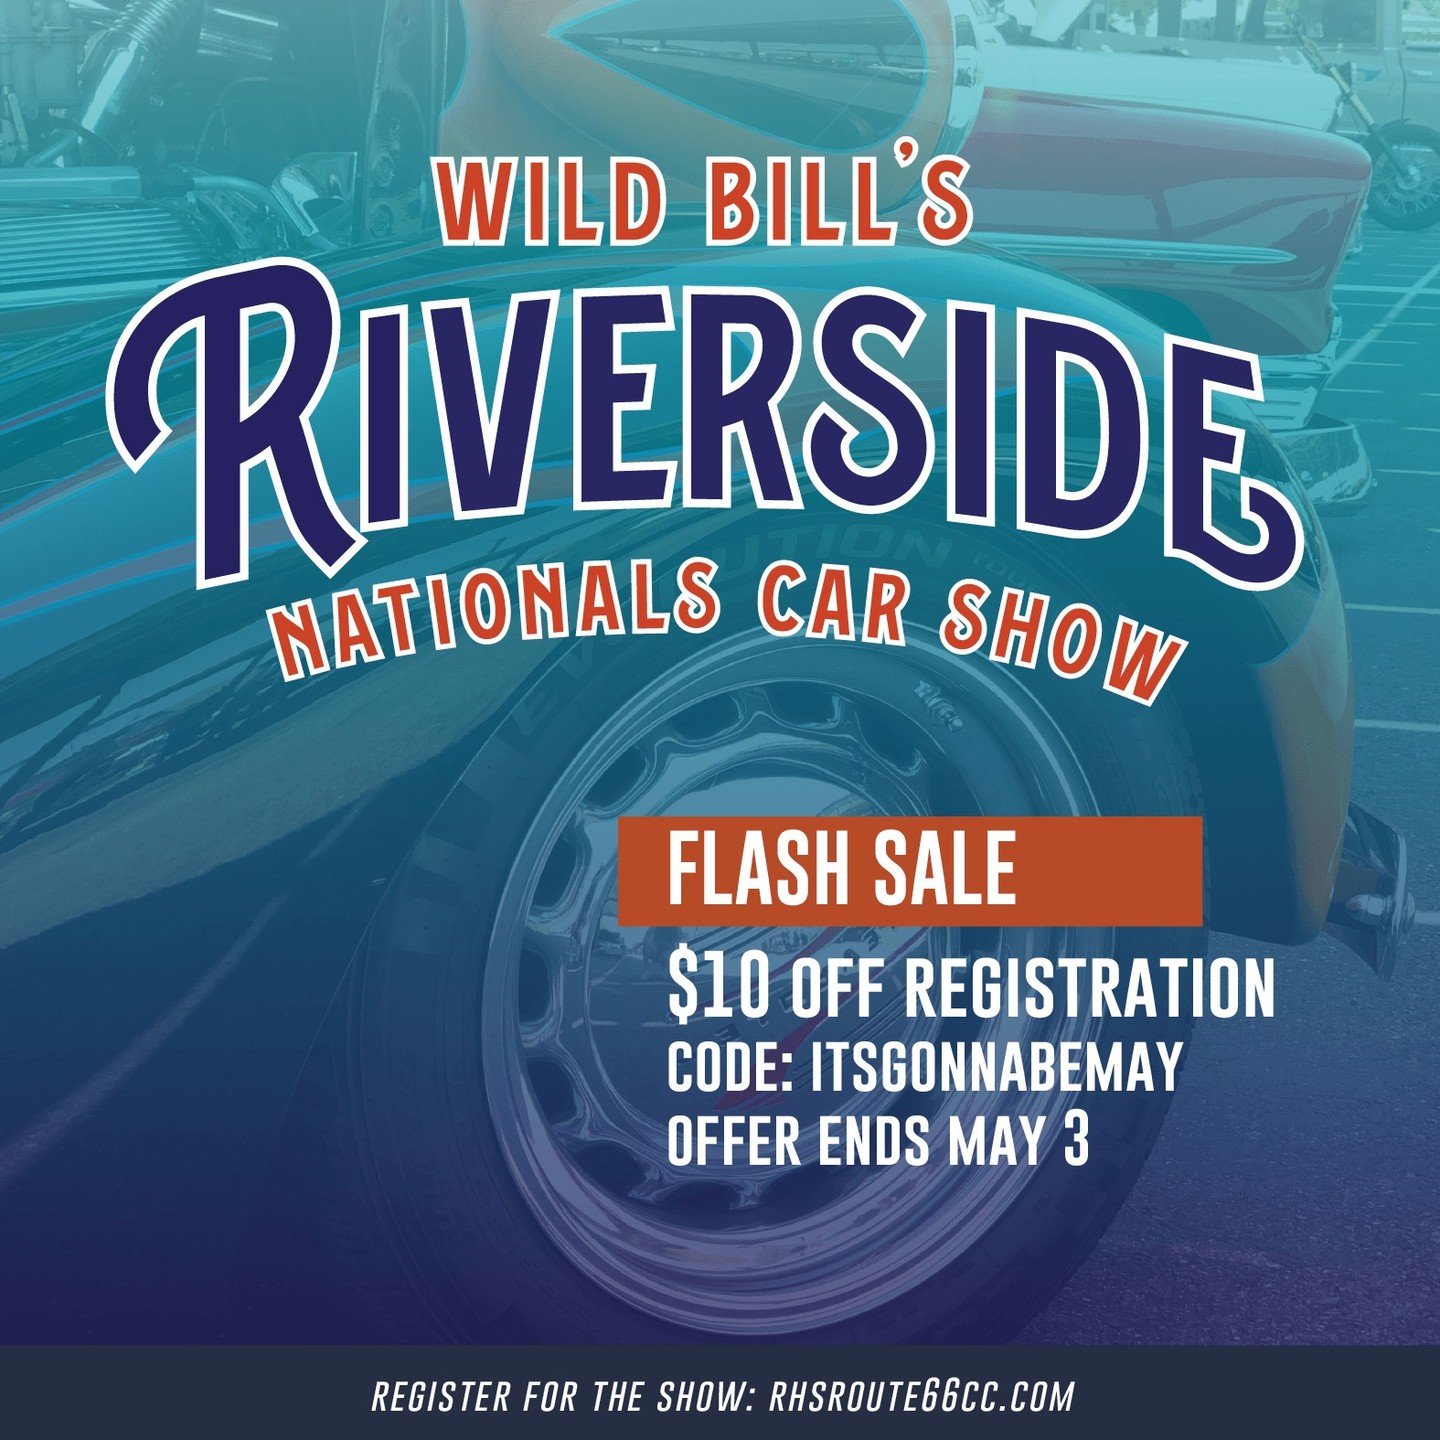 FLASH SALE! 

For a limited time get $10 off event registration with code: ITSGONNABEMAY

🥊: rhsroute66cc.com

*not valid on previous orders